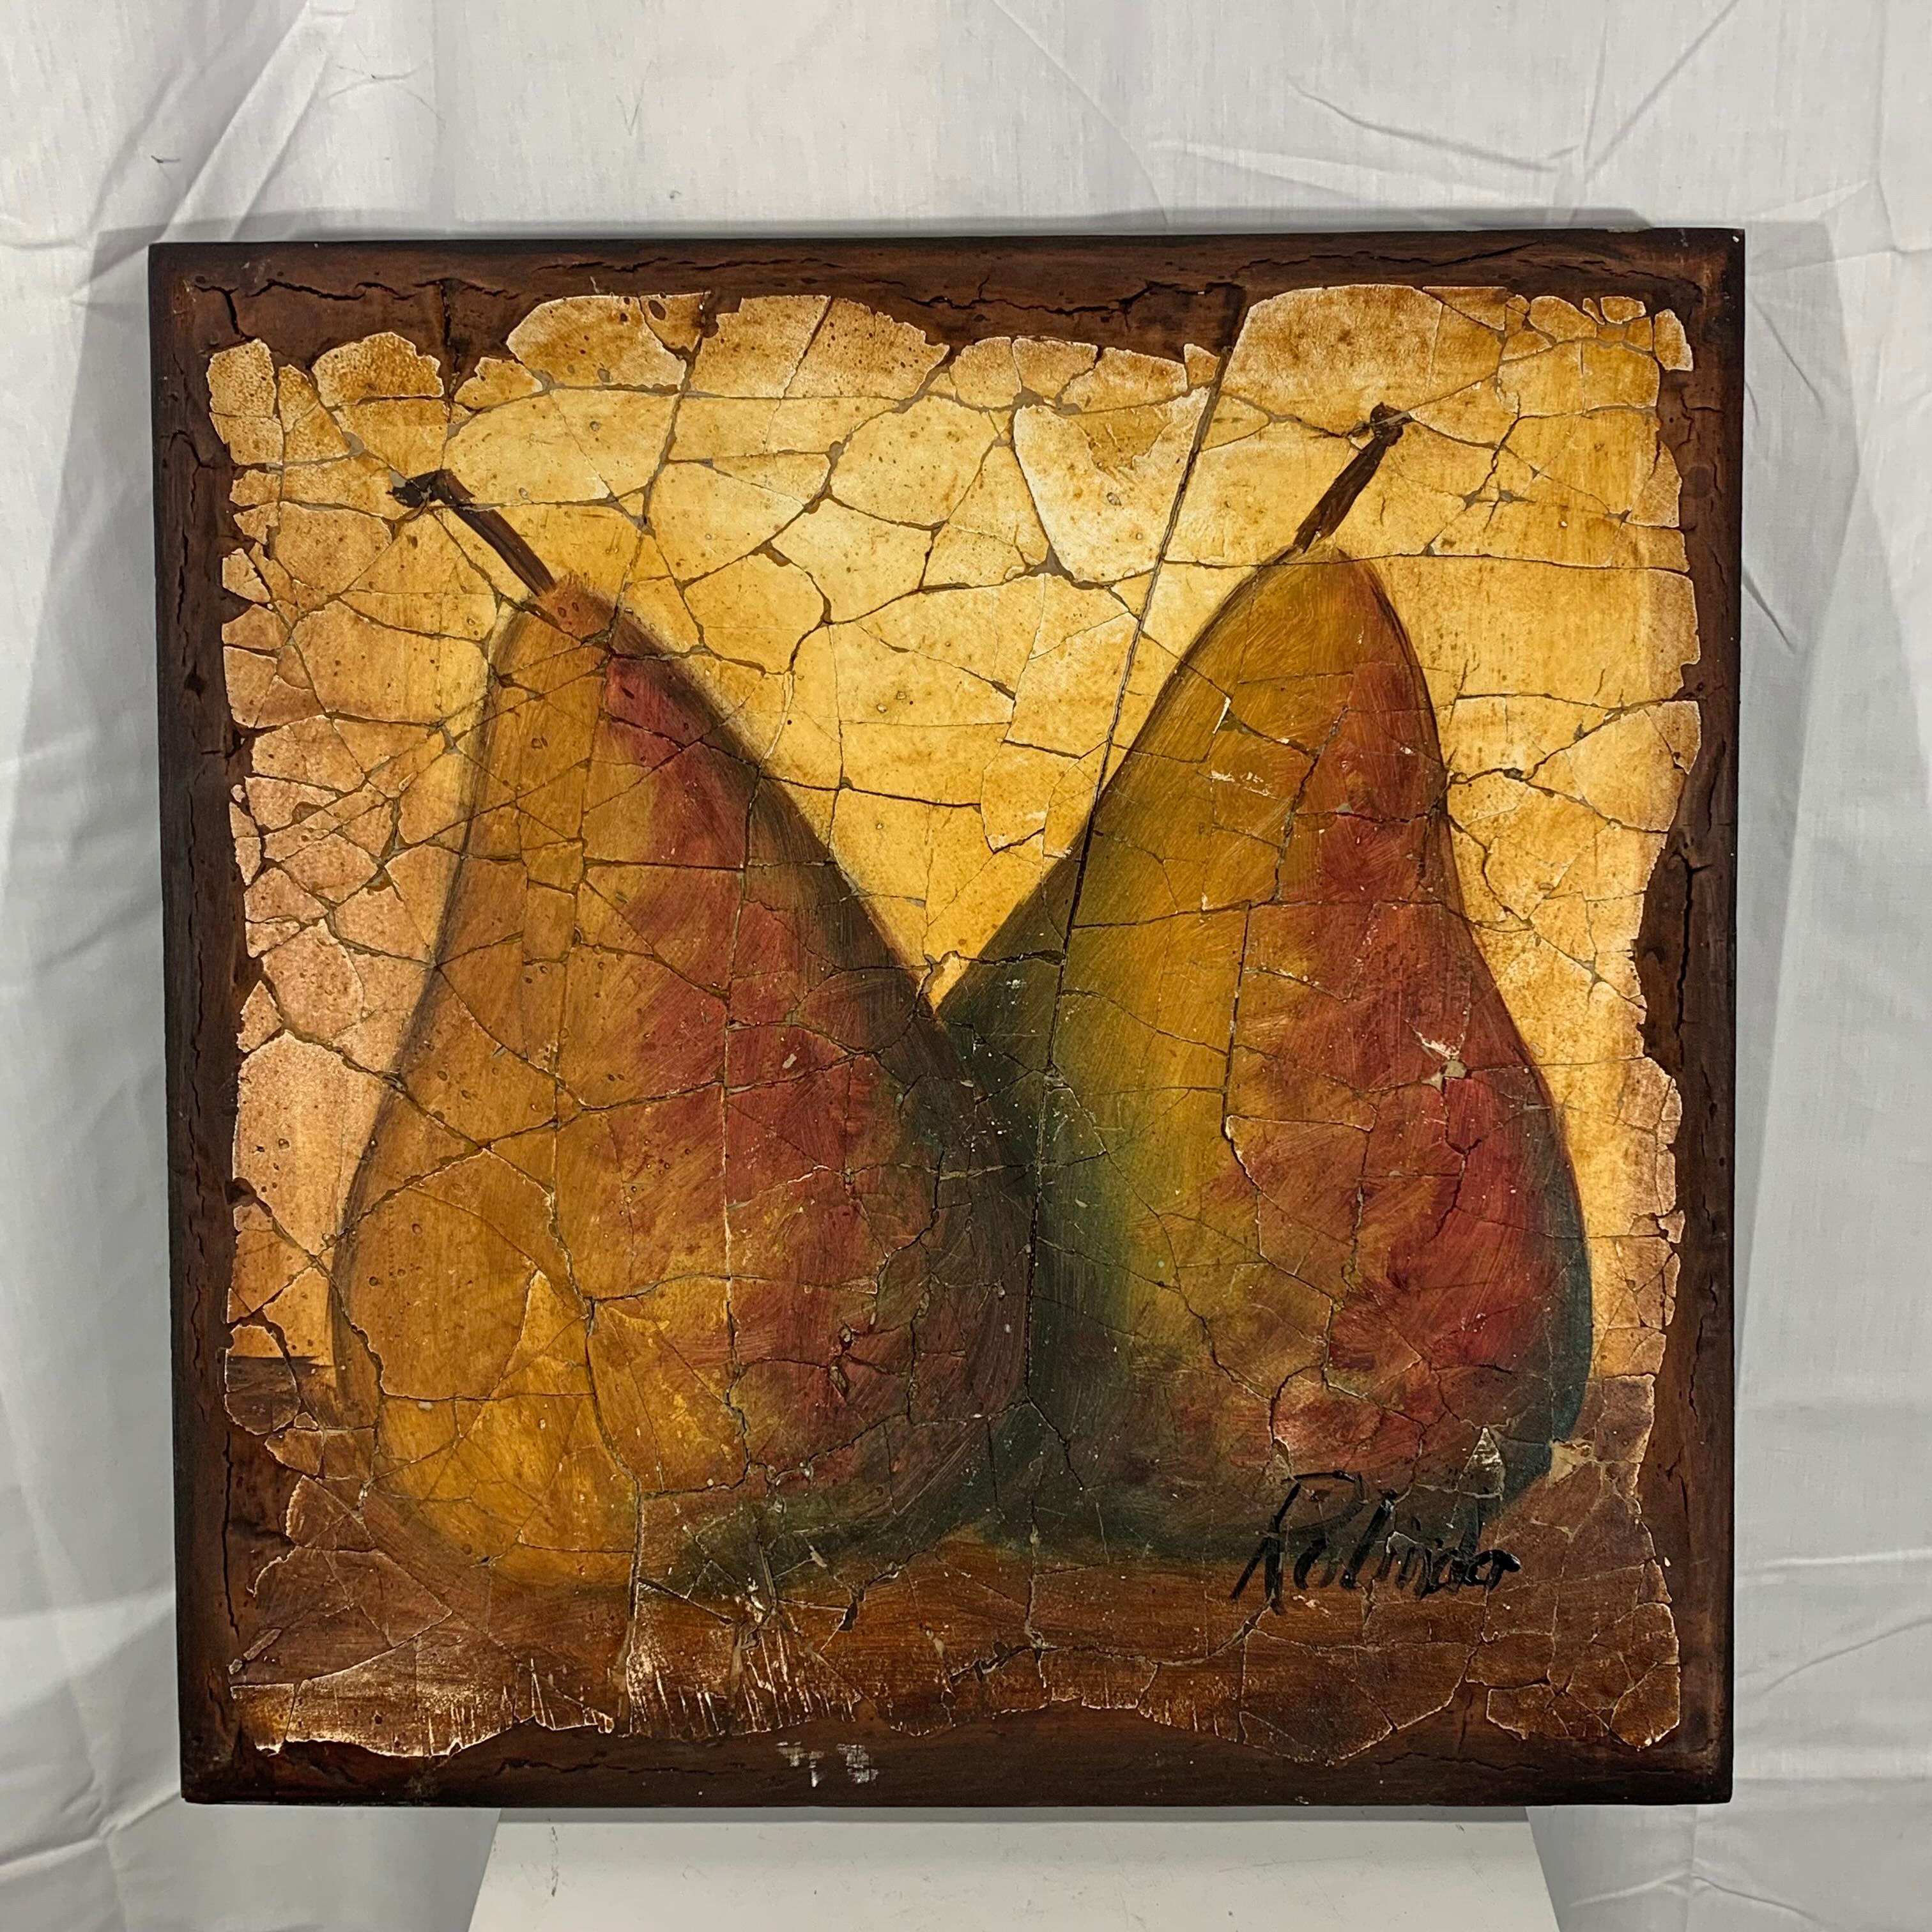 18"x 18" Two of a Kind by Rolinda Stotts Original Mixed Media